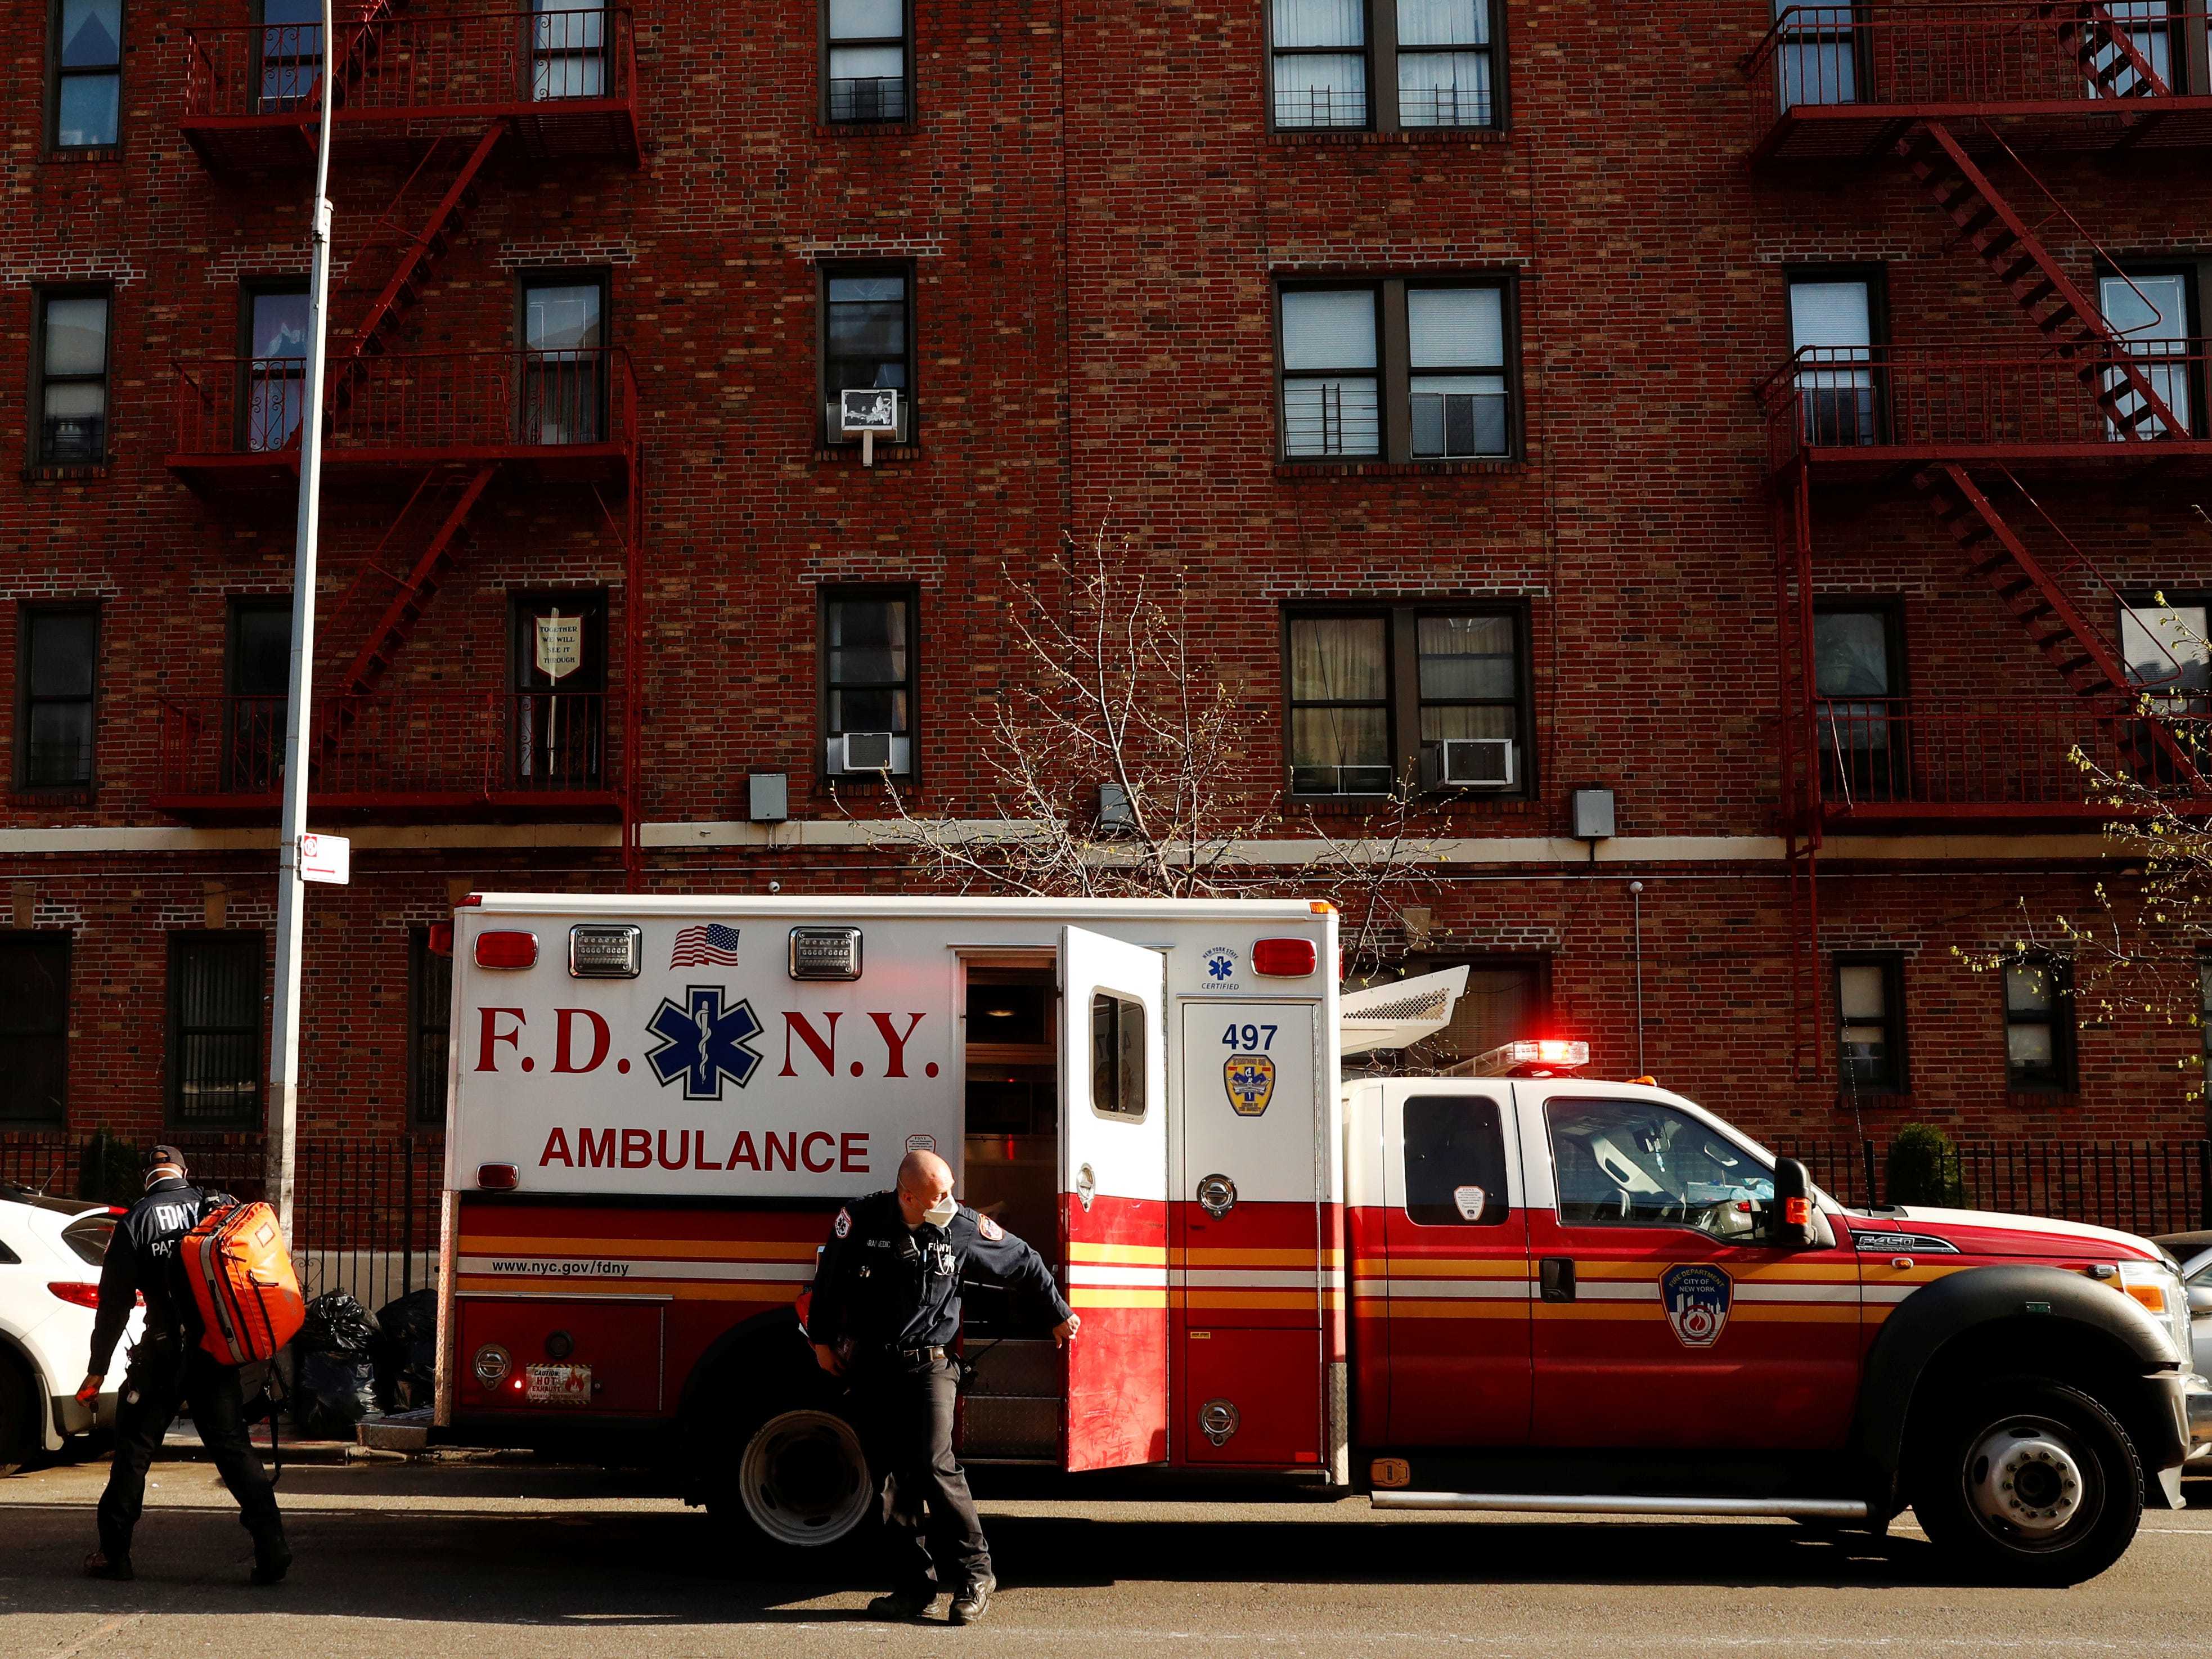 FIEL PHOTO: New York City Fire Department (FDNY) Emergency Medical Technicians (EMT) wearing personal protective equipment arrive to assist a woman who was having difficulty breathing during ongoing outbreak of the coronavirus disease (COVID19) in New York, U.S., April 15, 2020. REUTERS/Lucas Jackson